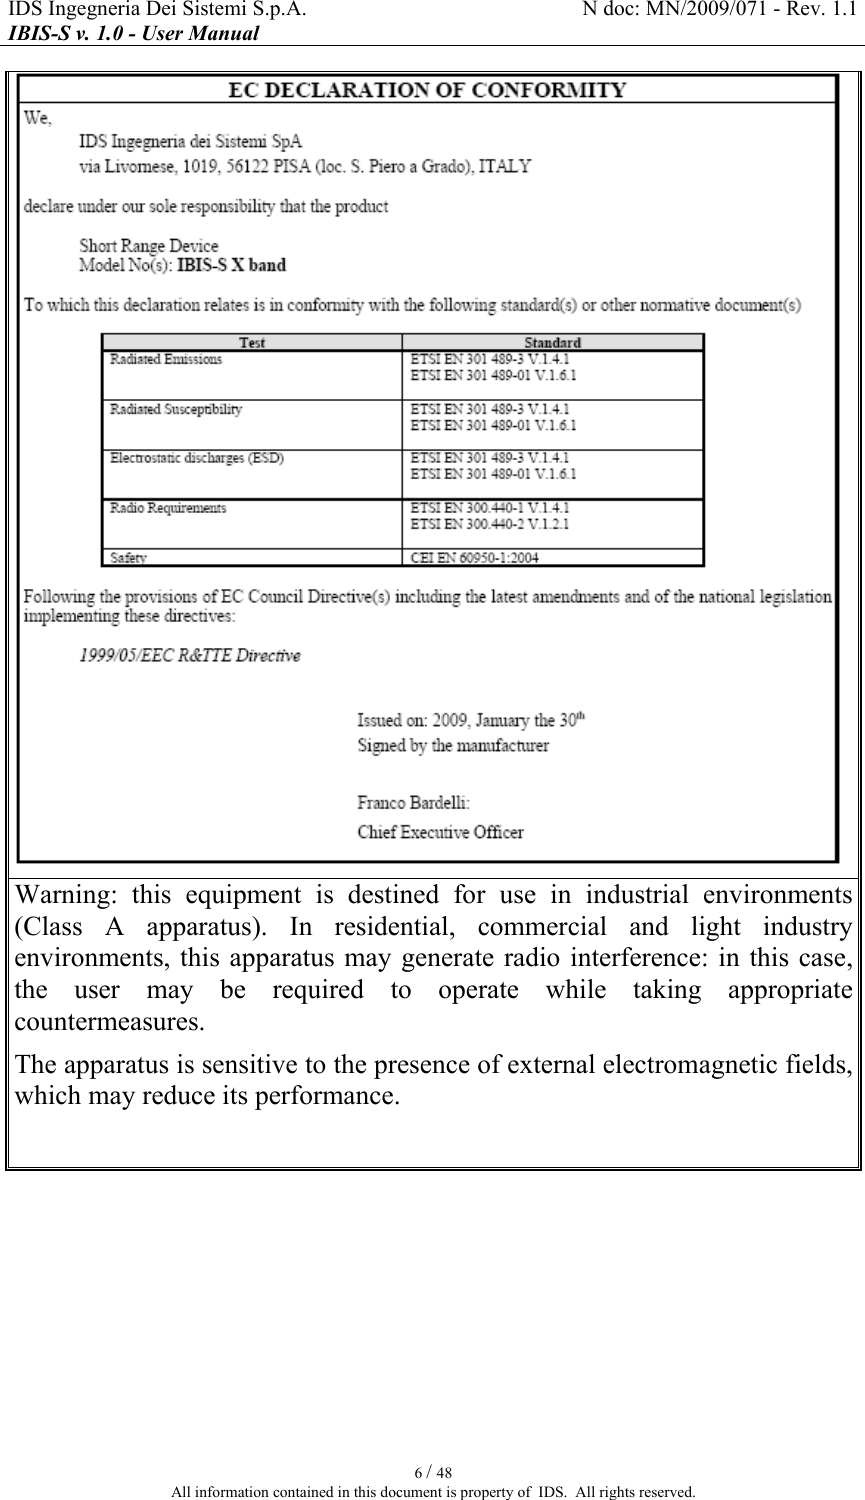 IDS Ingegneria Dei Sistemi S.p.A.  N doc: MN/2009/071 - Rev. 1.1 IBIS-S v. 1.0 - User Manual   6 / 48 All information contained in this document is property of  IDS.  All rights reserved.  Warning:  this  equipment  is  destined  for  use  in  industrial  environments (Class  A  apparatus).  In  residential,  commercial  and light  industry environments, this apparatus  may  generate radio  interference: in  this case, the  user  may  be  required  to  operate  while  taking  appropriate countermeasures. The apparatus is sensitive to the presence of external electromagnetic fields, which may reduce its performance.   